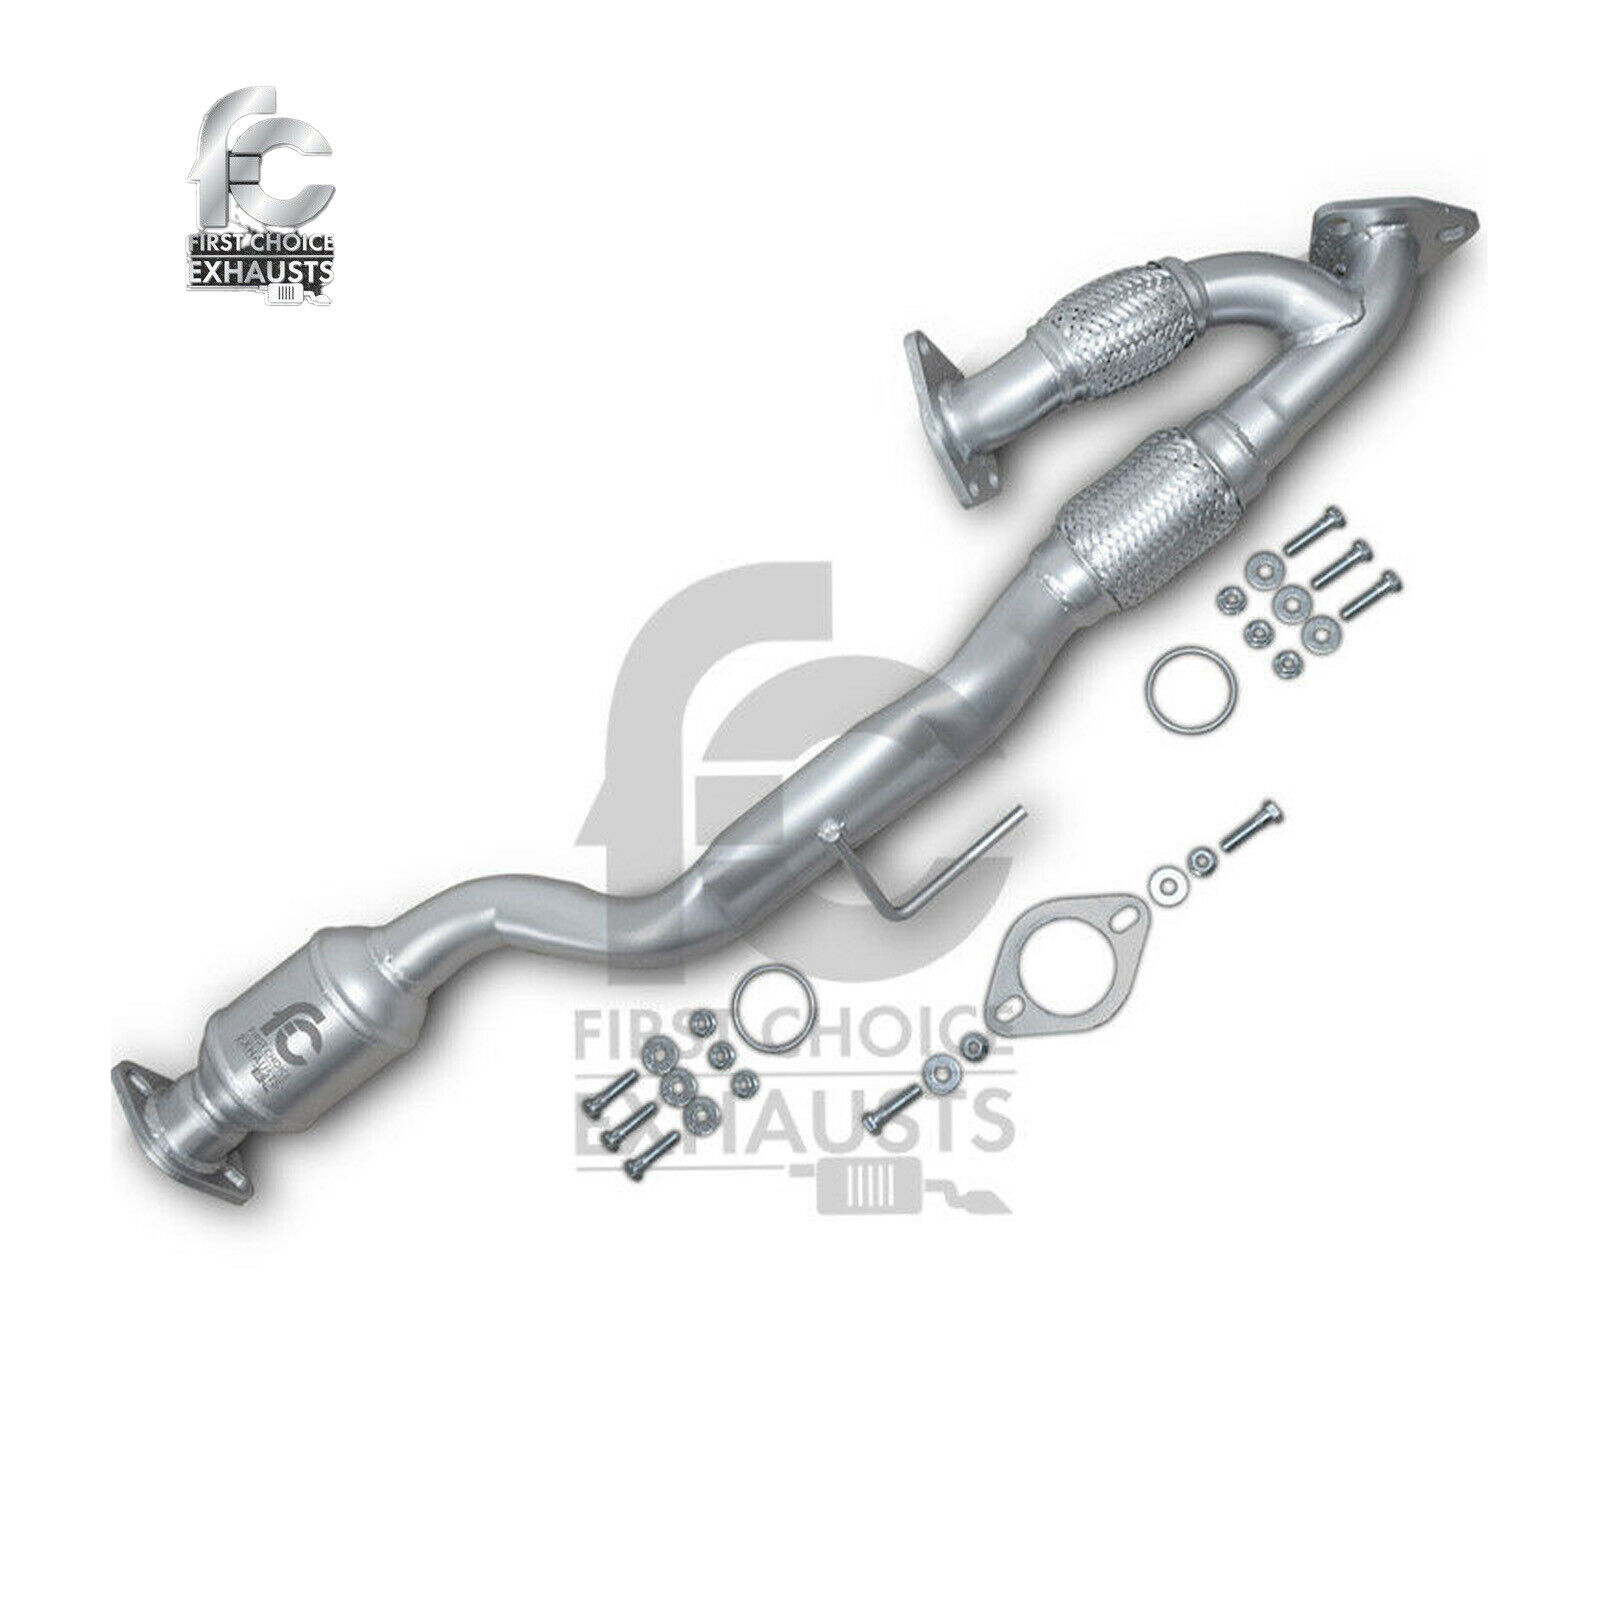 Fits 2013-2019 Nissan Pathfinder 3.5L Catalytic Converter with Flex Y-pipe